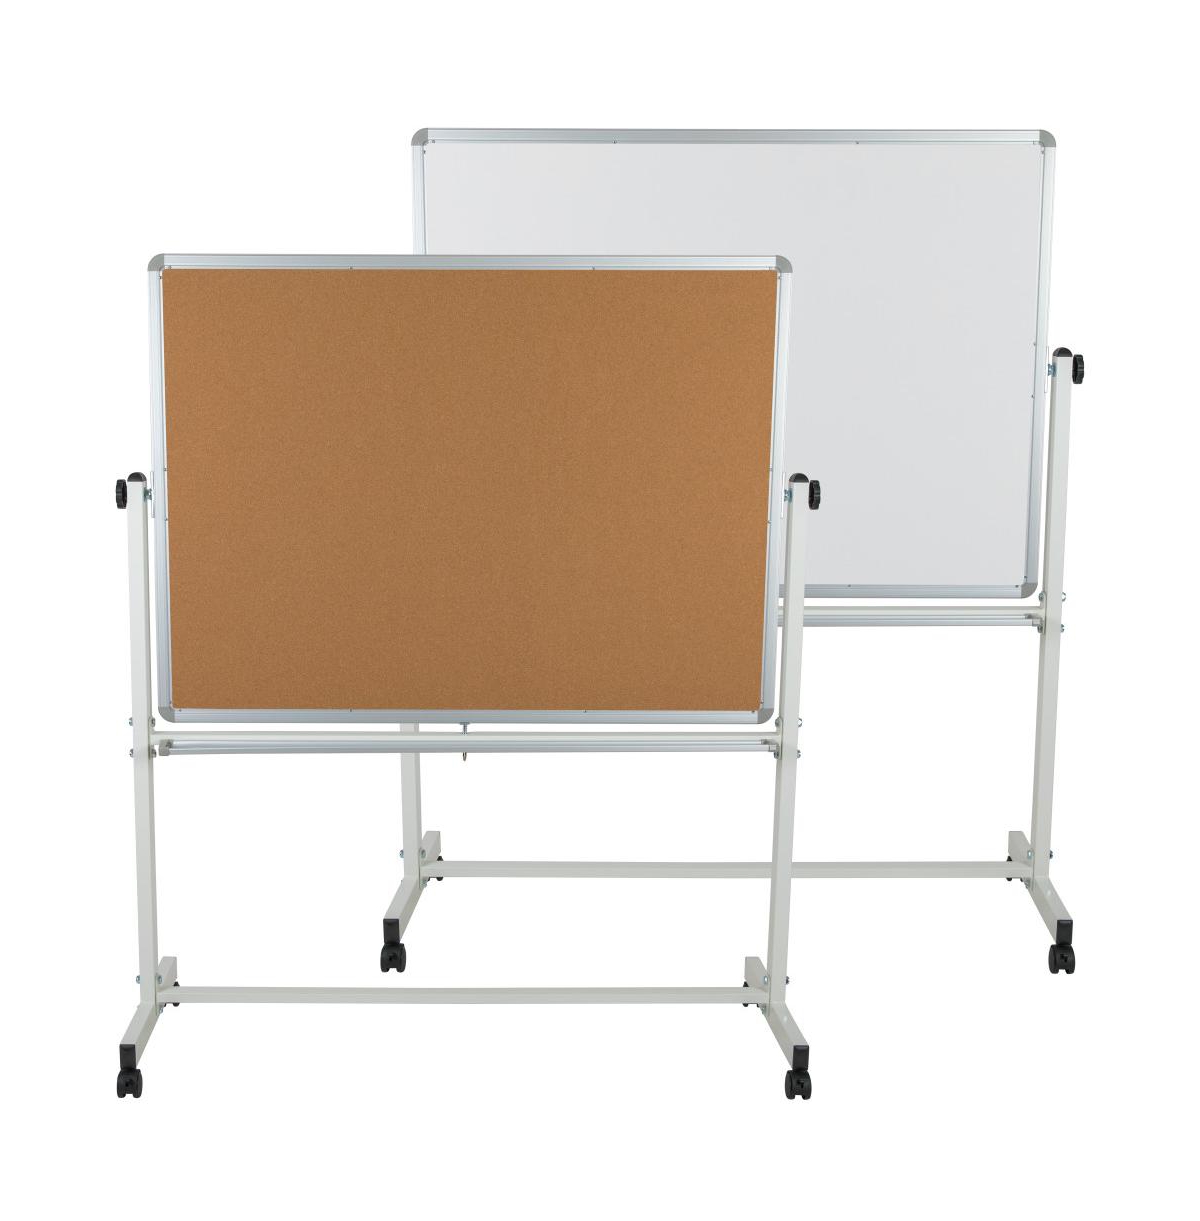 Reversible Mobile Cork Bulletin Board And White Board Stand With Pen Tray - Natural/white